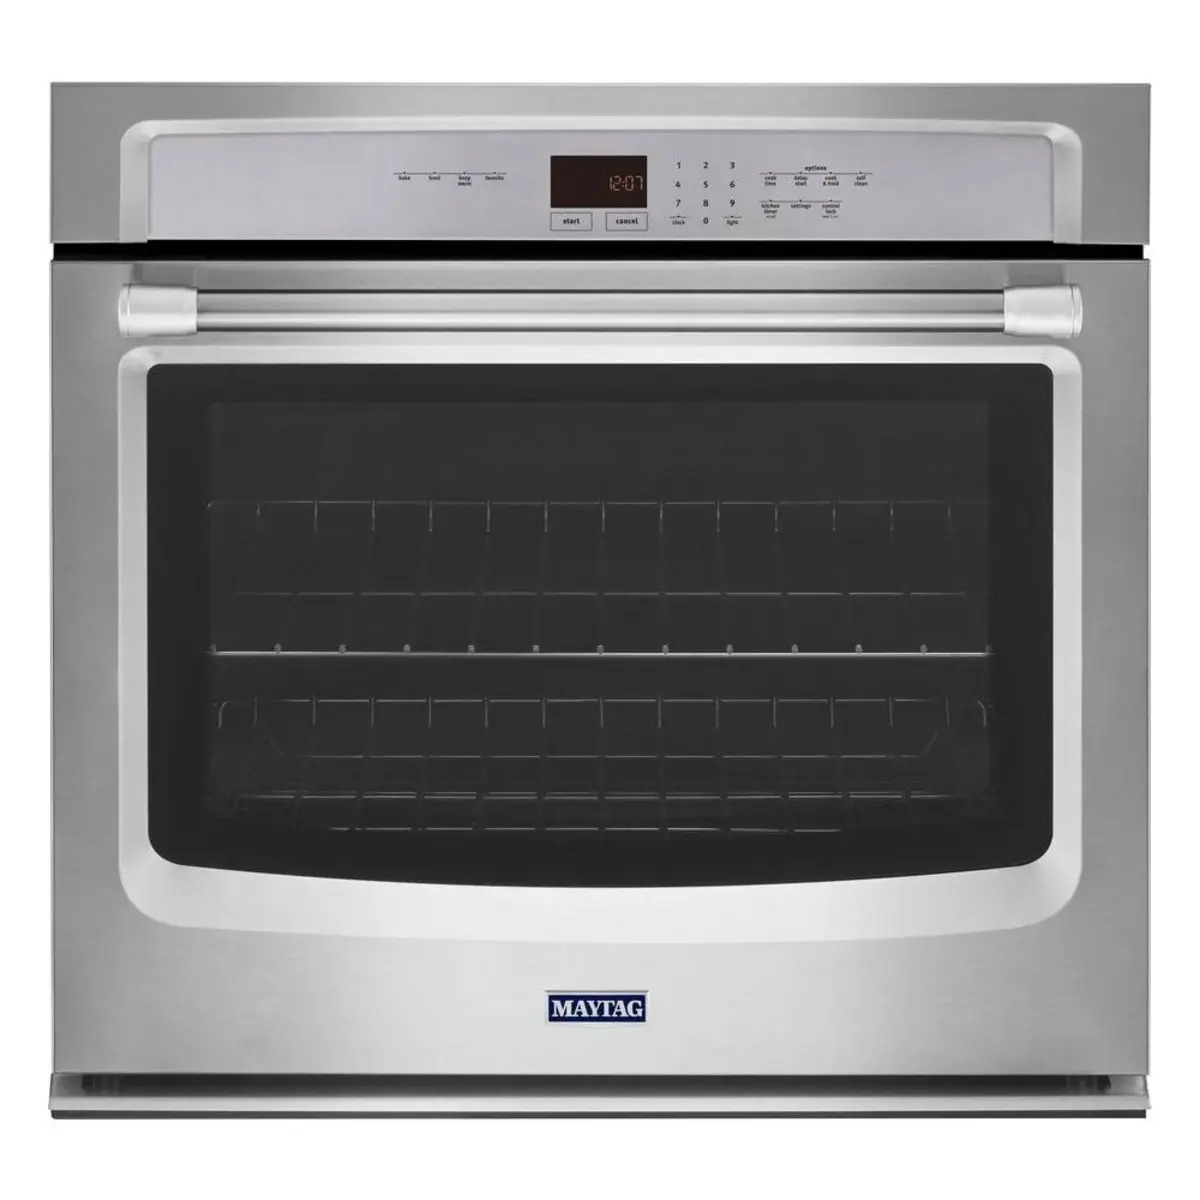 How To Fix The Error Code F3 For Maytag Oven